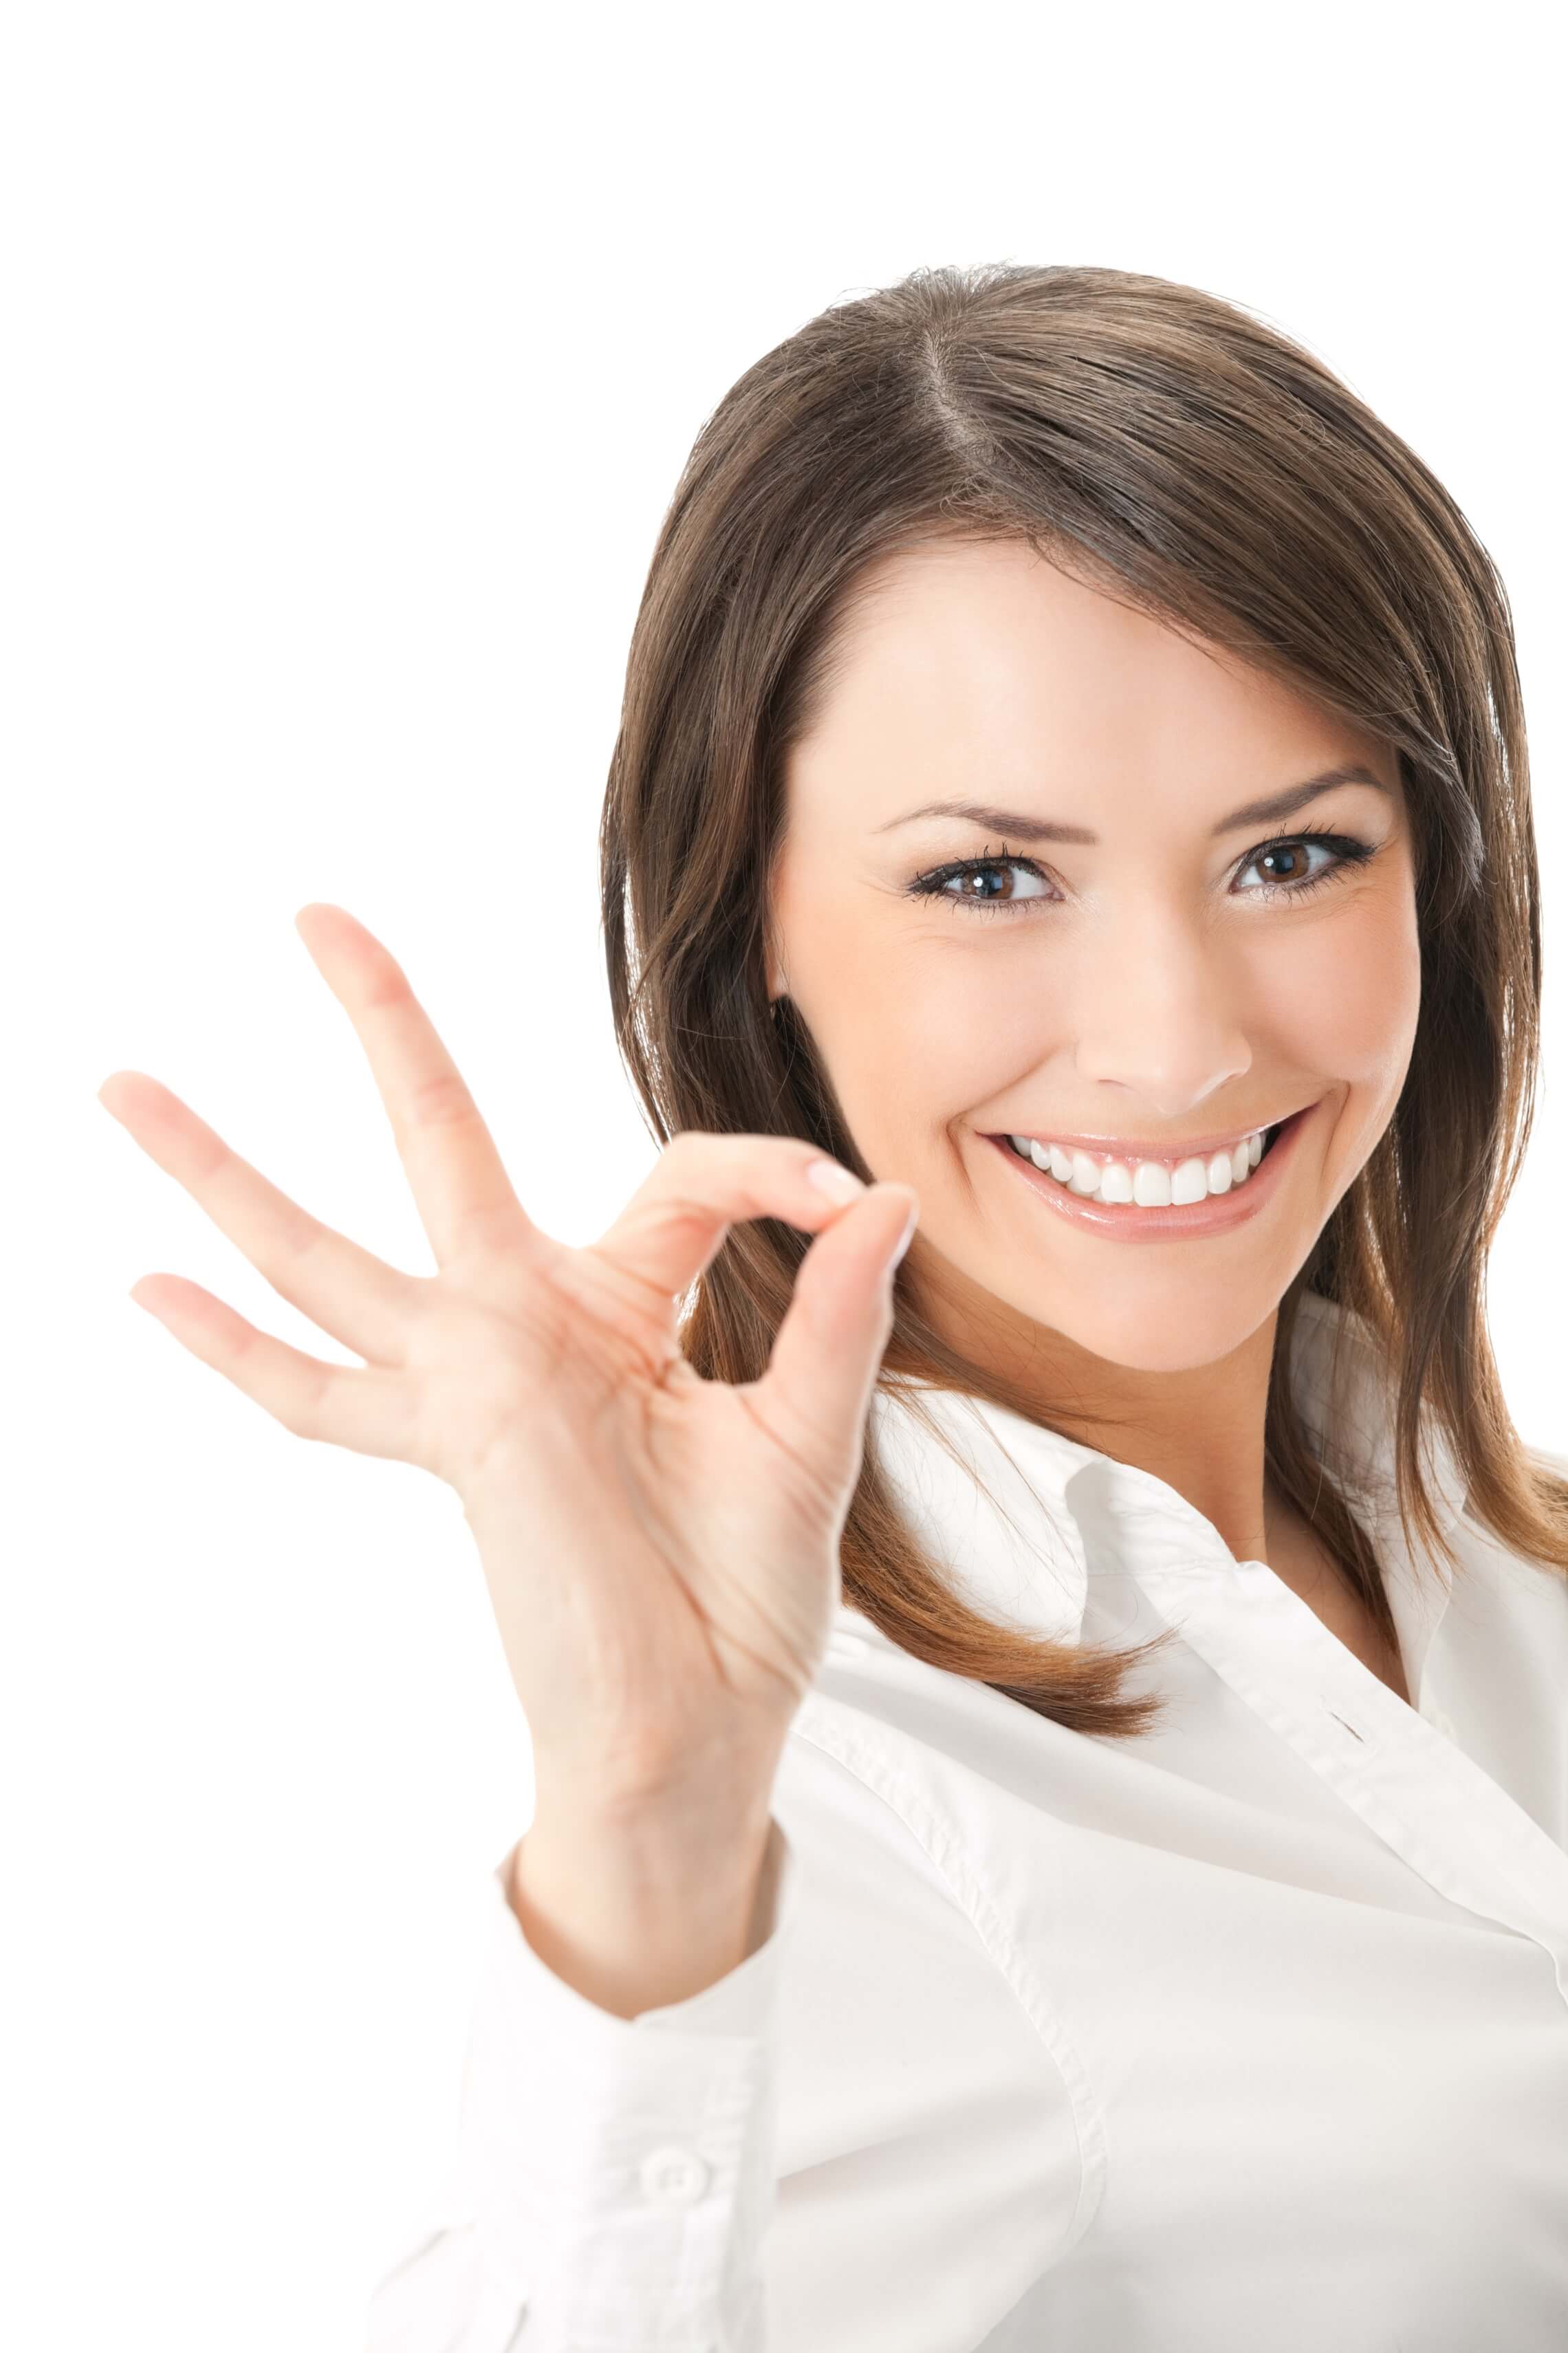 Portrait of happy smiling businesswoman with okay gesture, isolated on white background